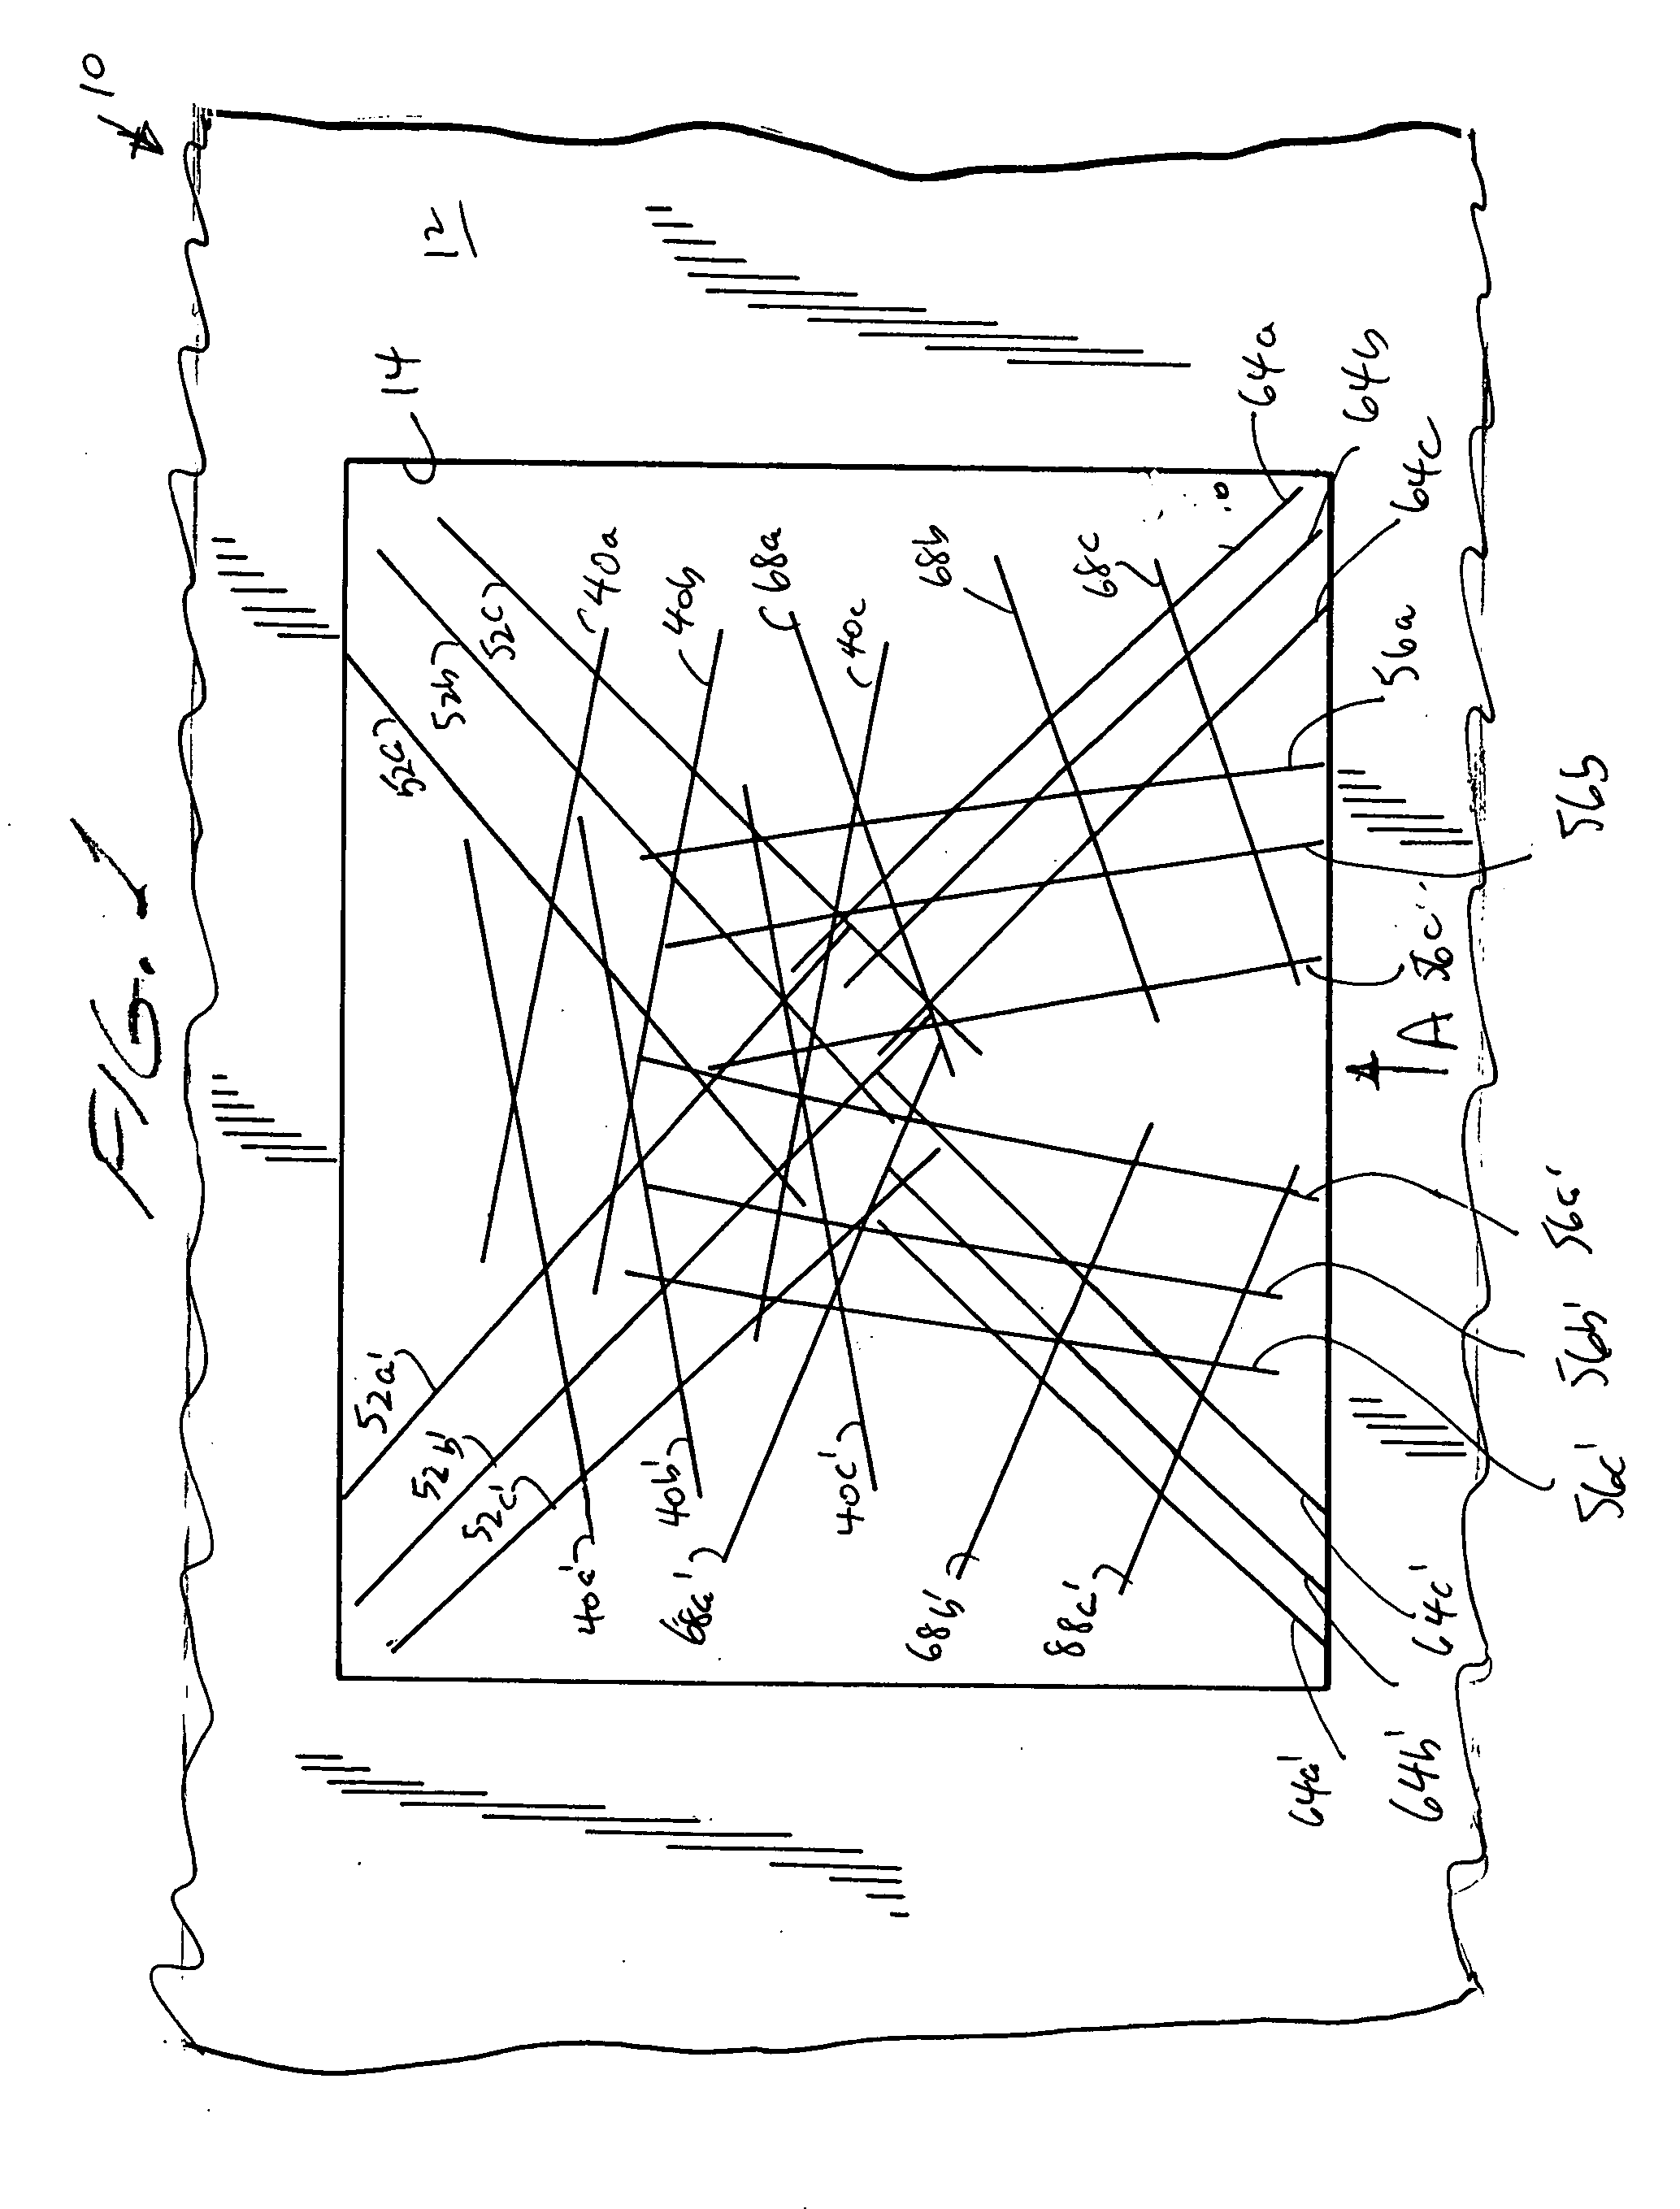 Generating a scan pattern over multiple surfaces of symbol-bearing objects passing through flat bed reader